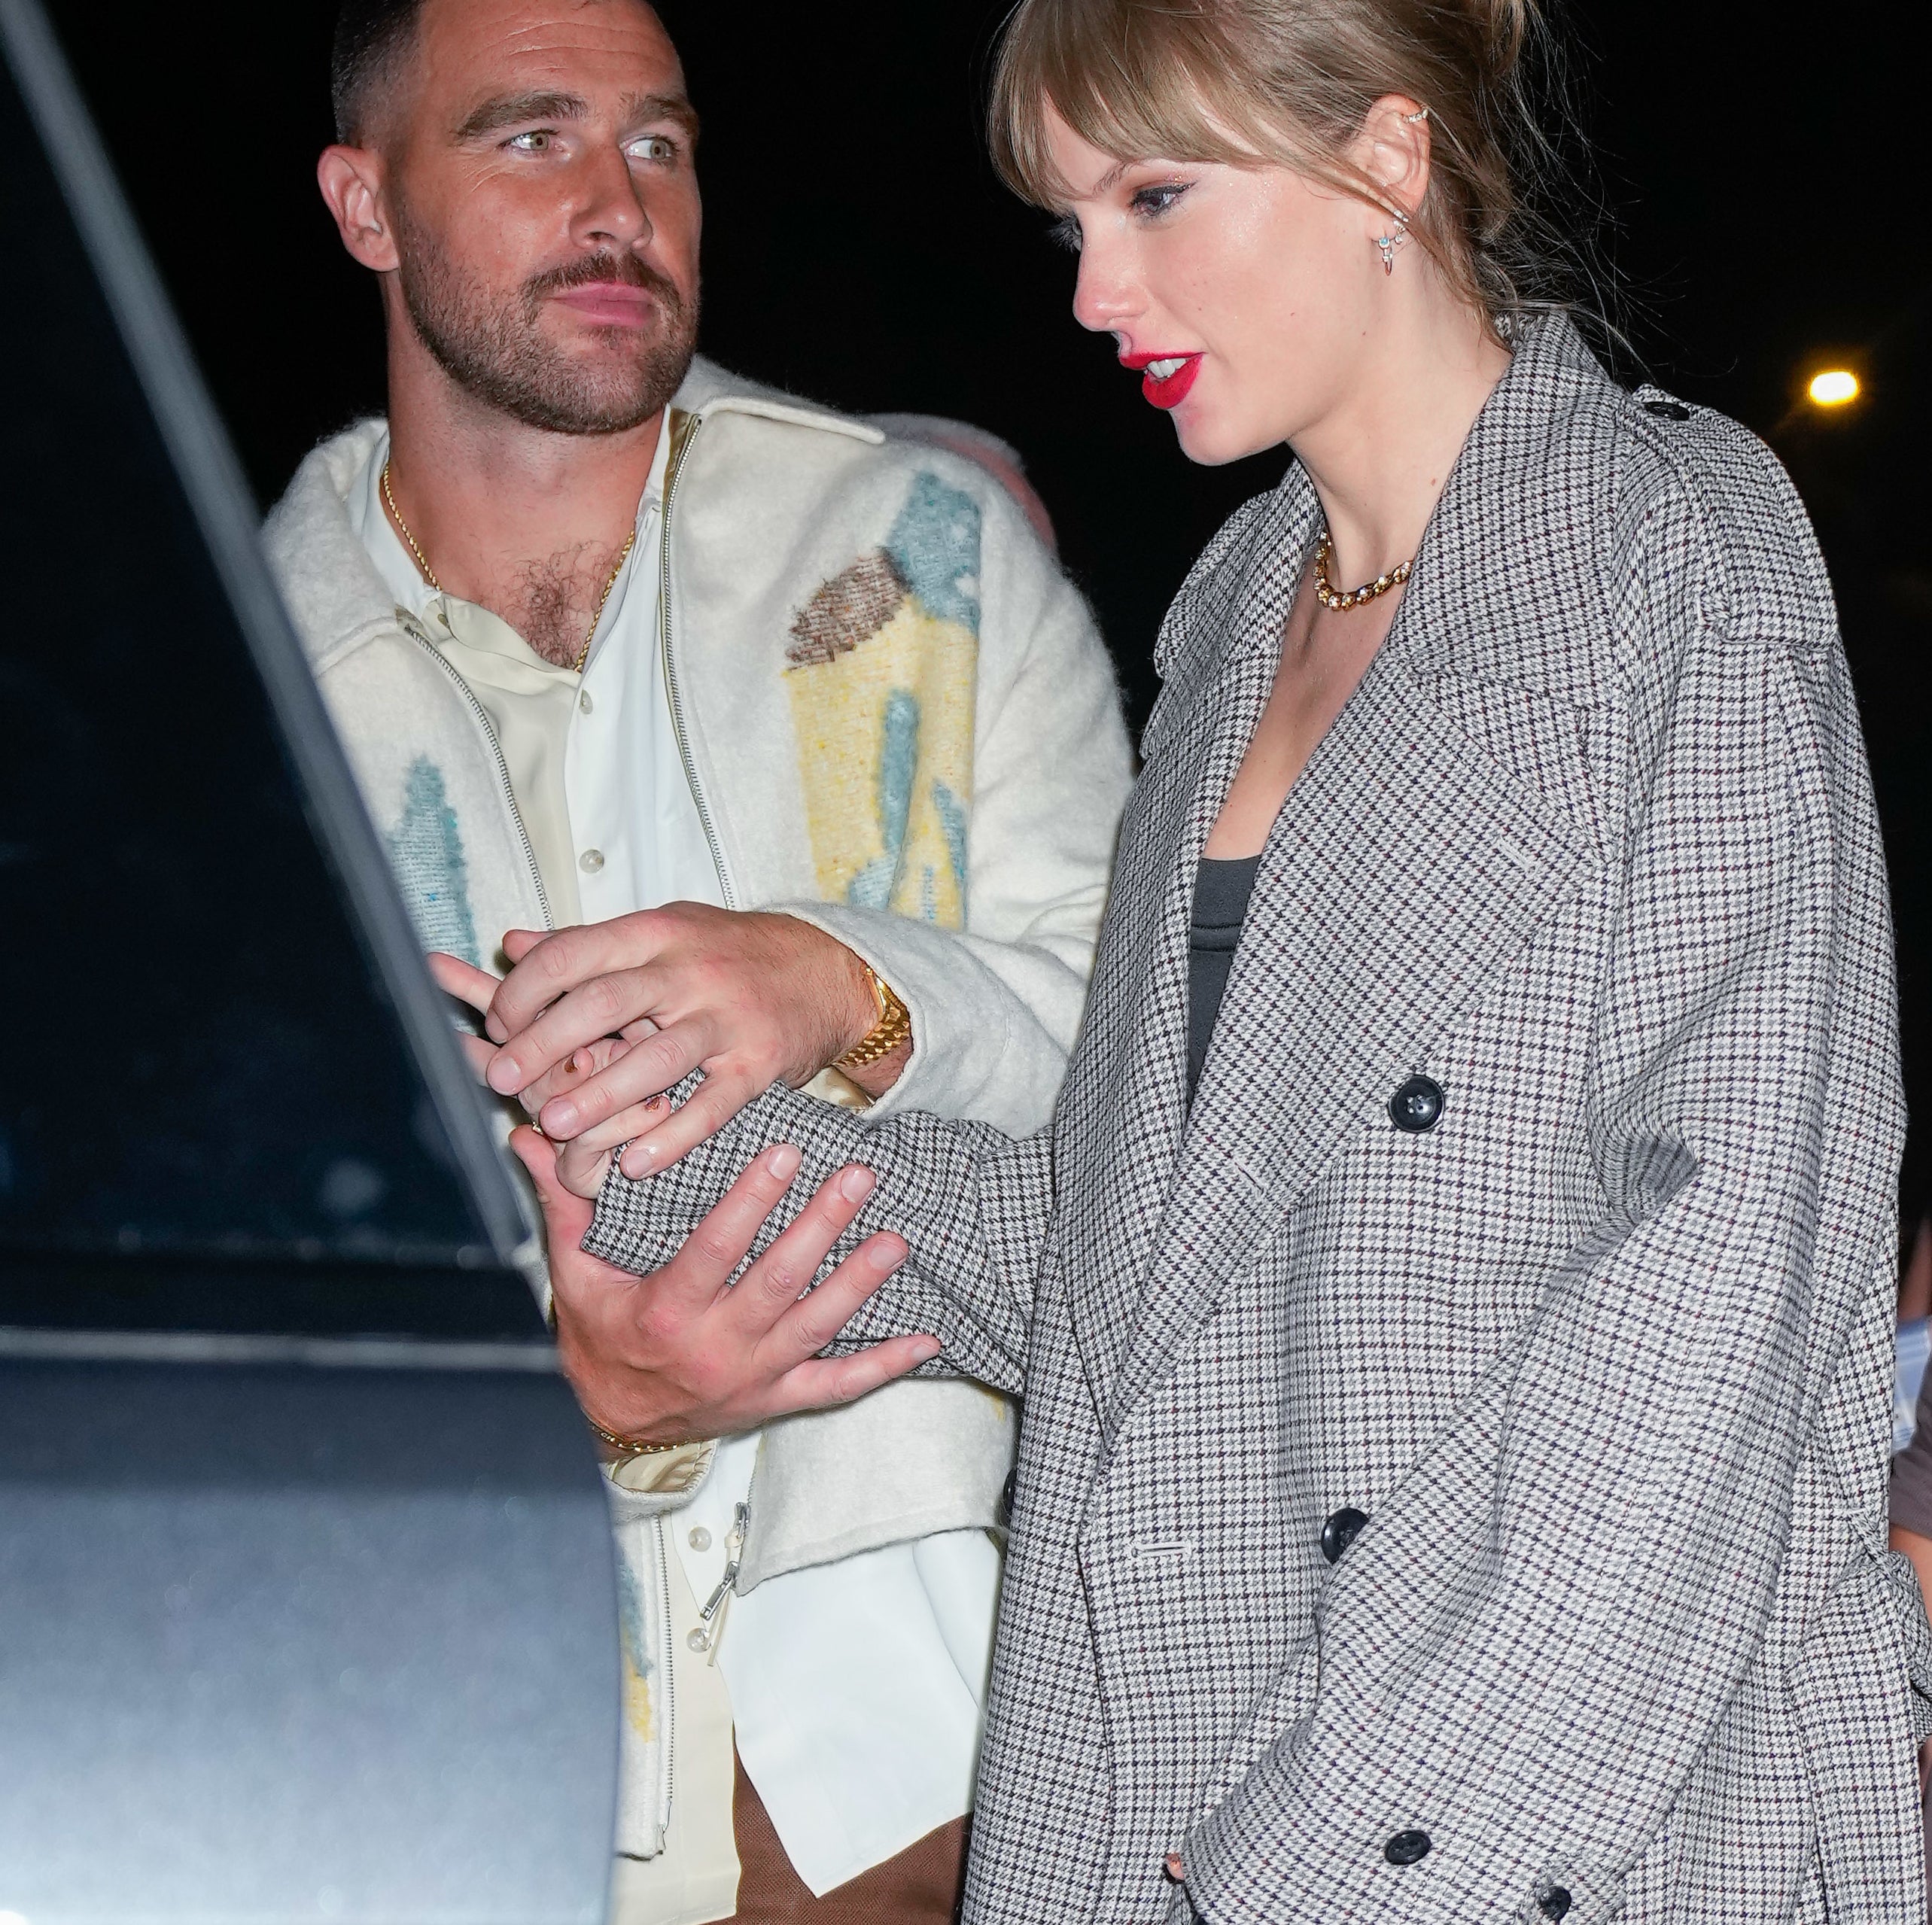 Closeup of Travis and Taylor holding hands as they get into a car